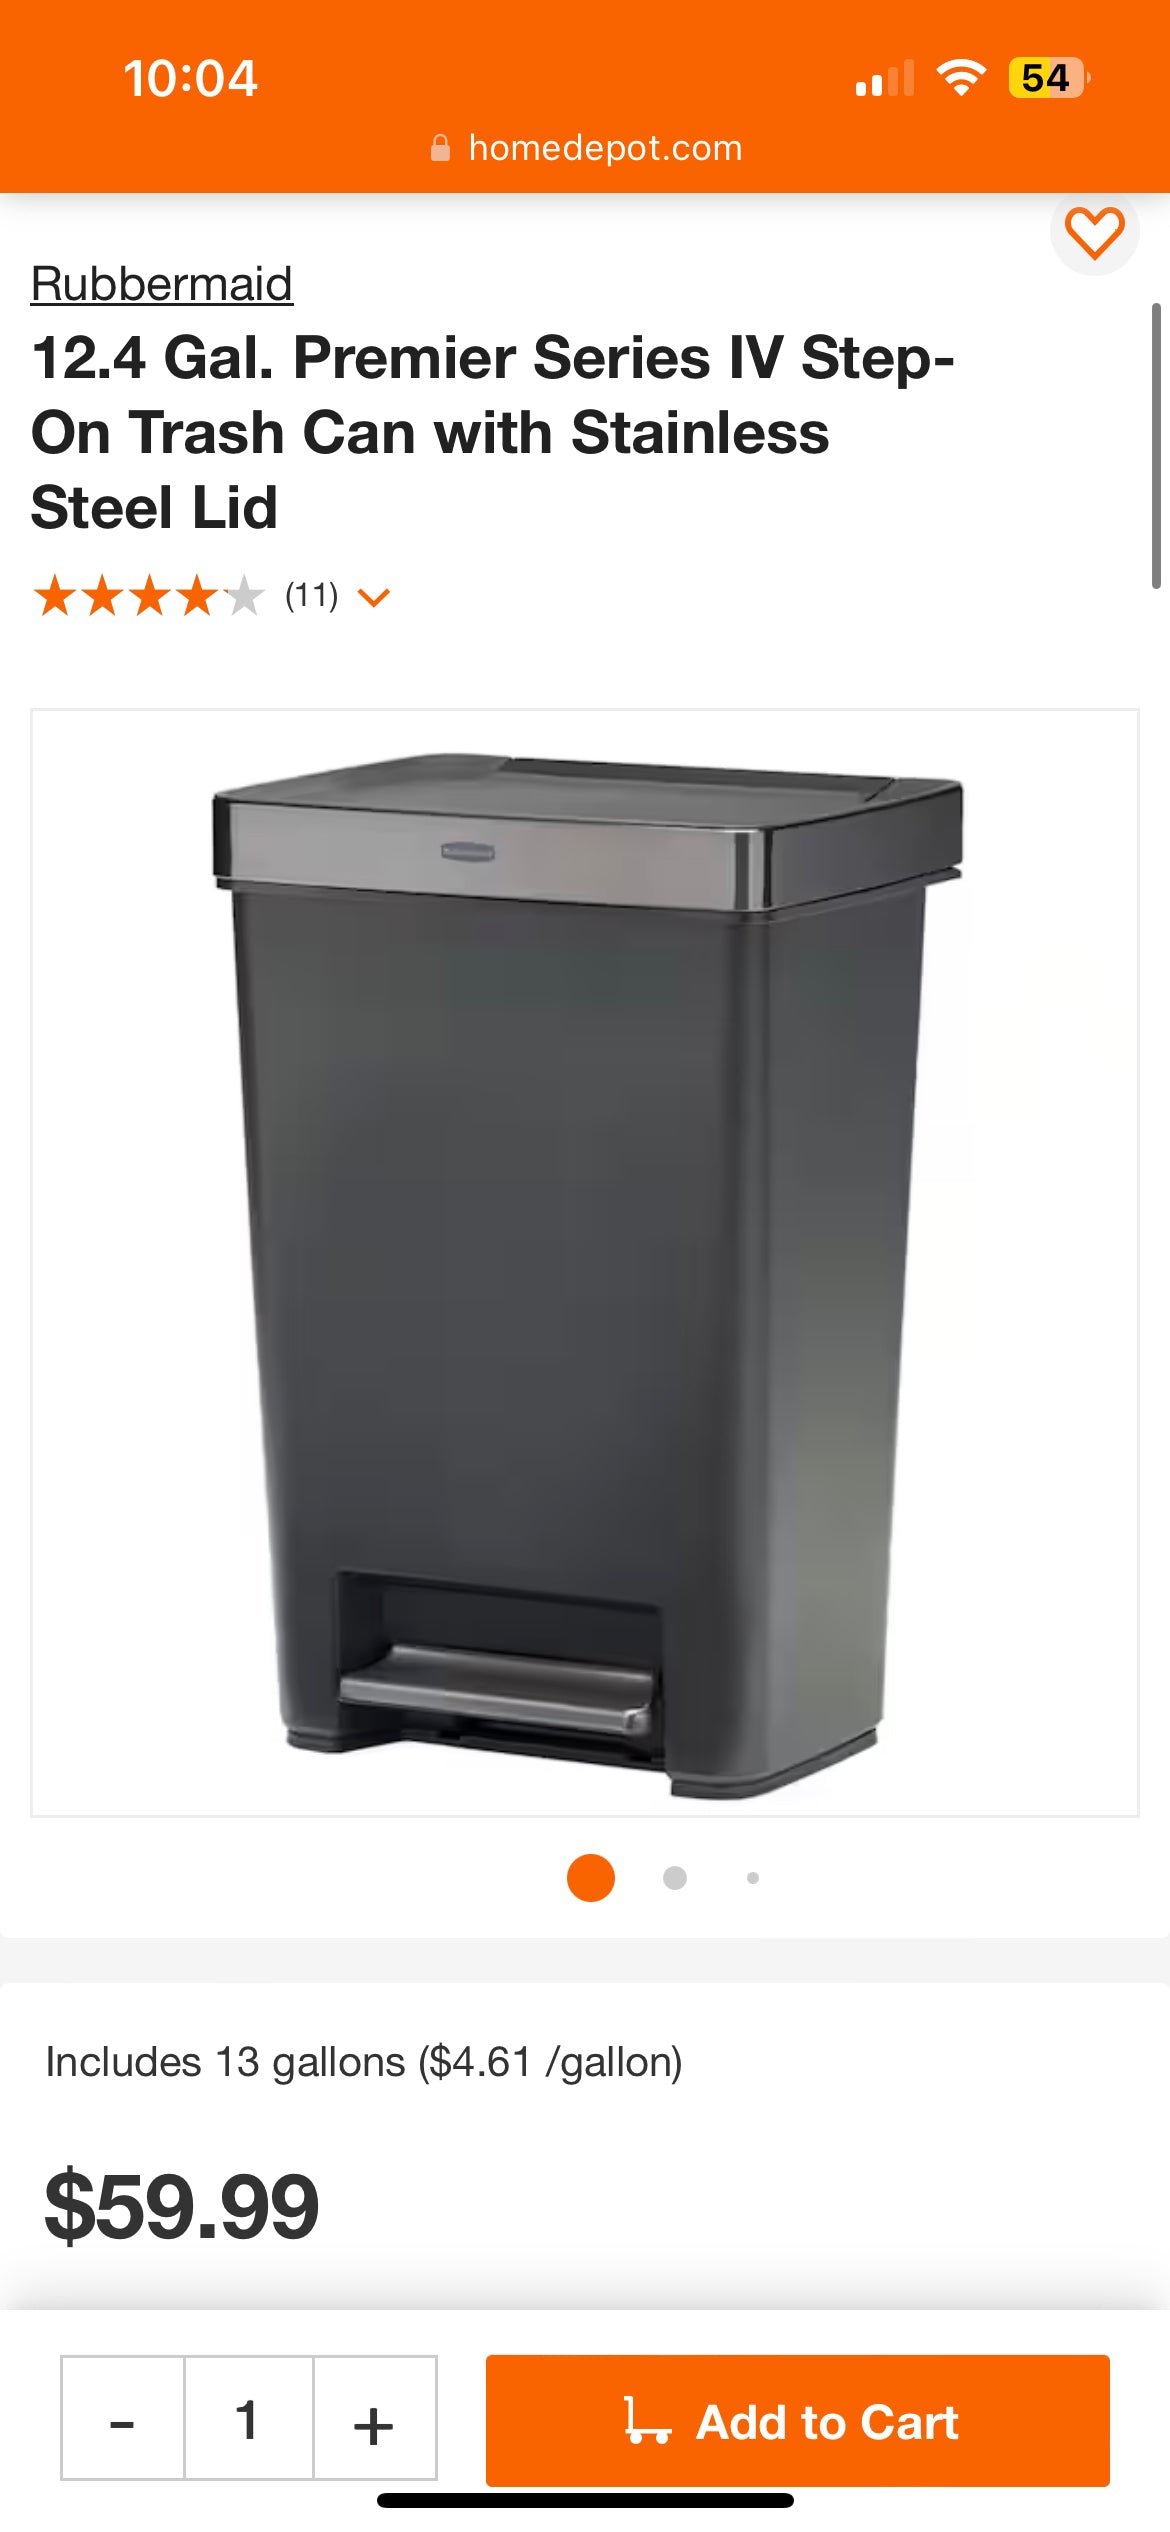 12.4 Gal. Premier Series IV Step-On Trash Can with Stainless Steel Lid